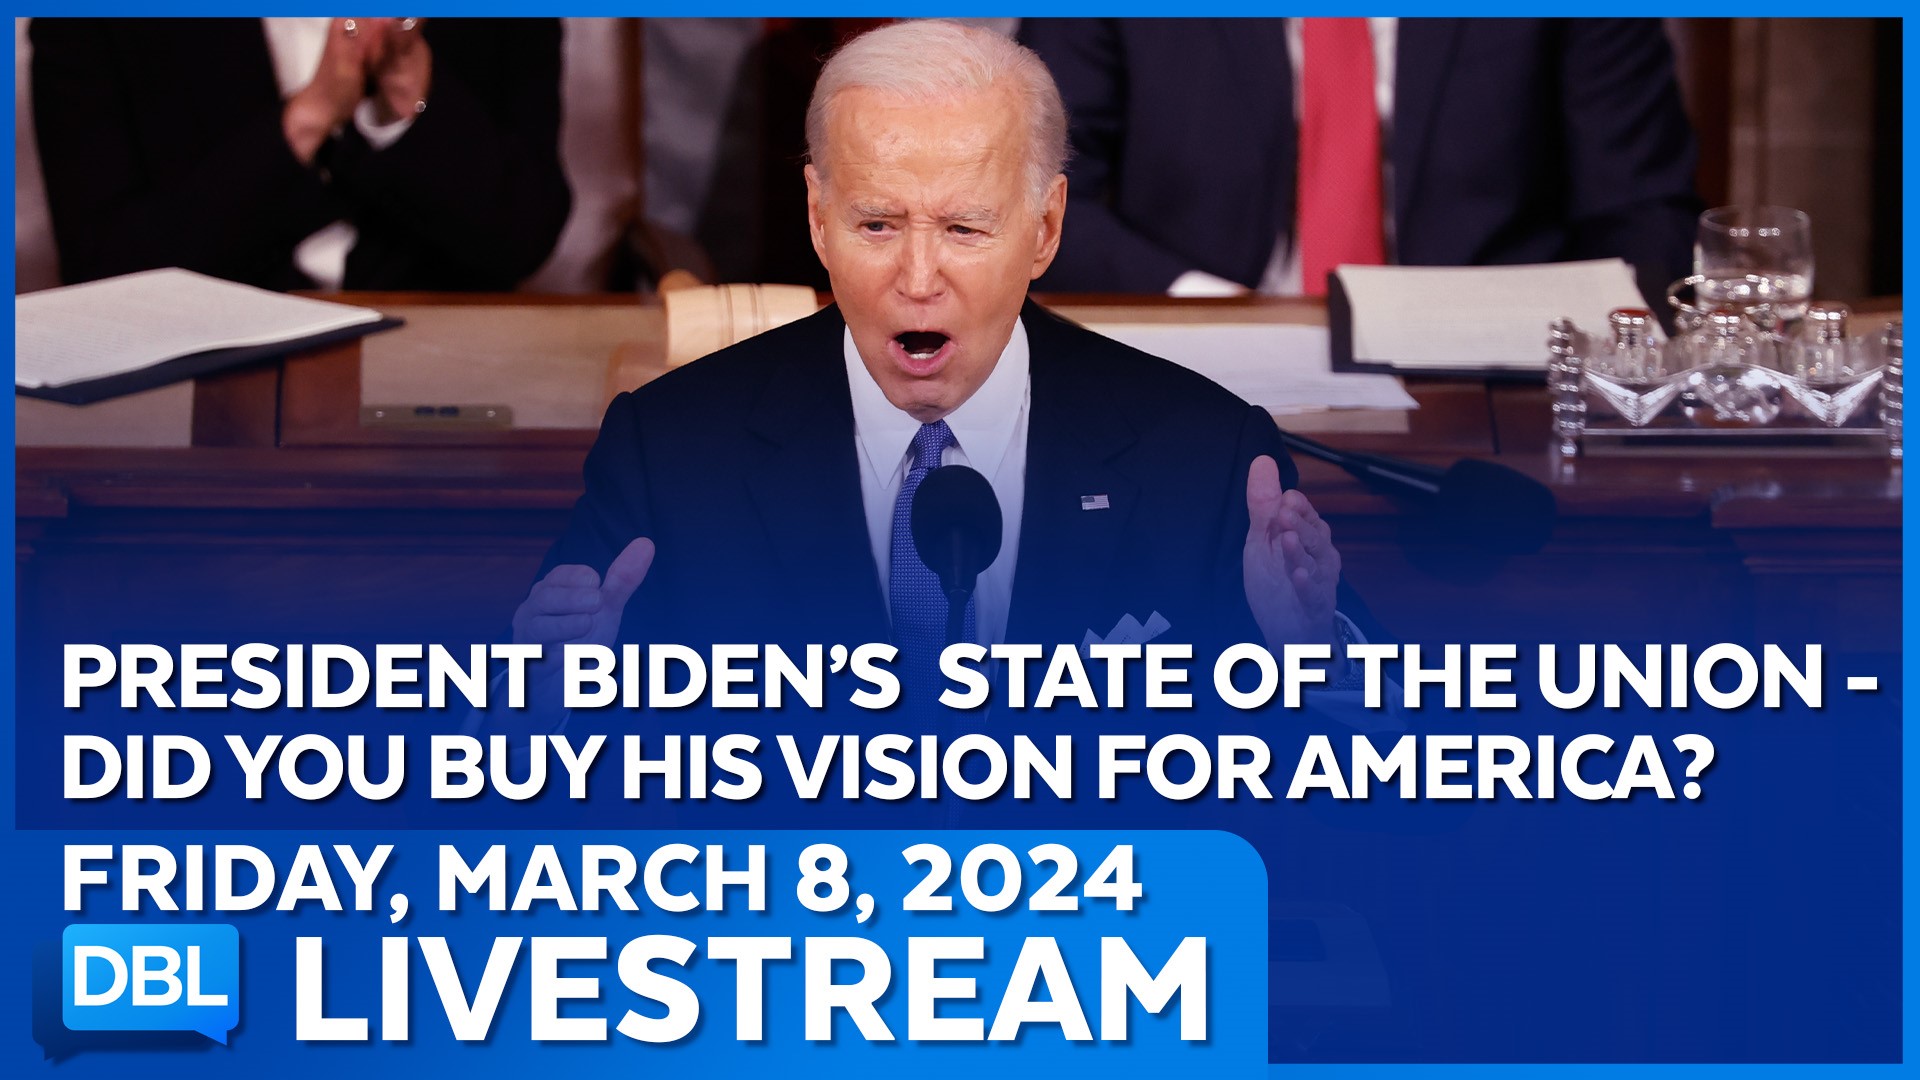 President Biden's State Of The Union, Did You Buy His Vision For America